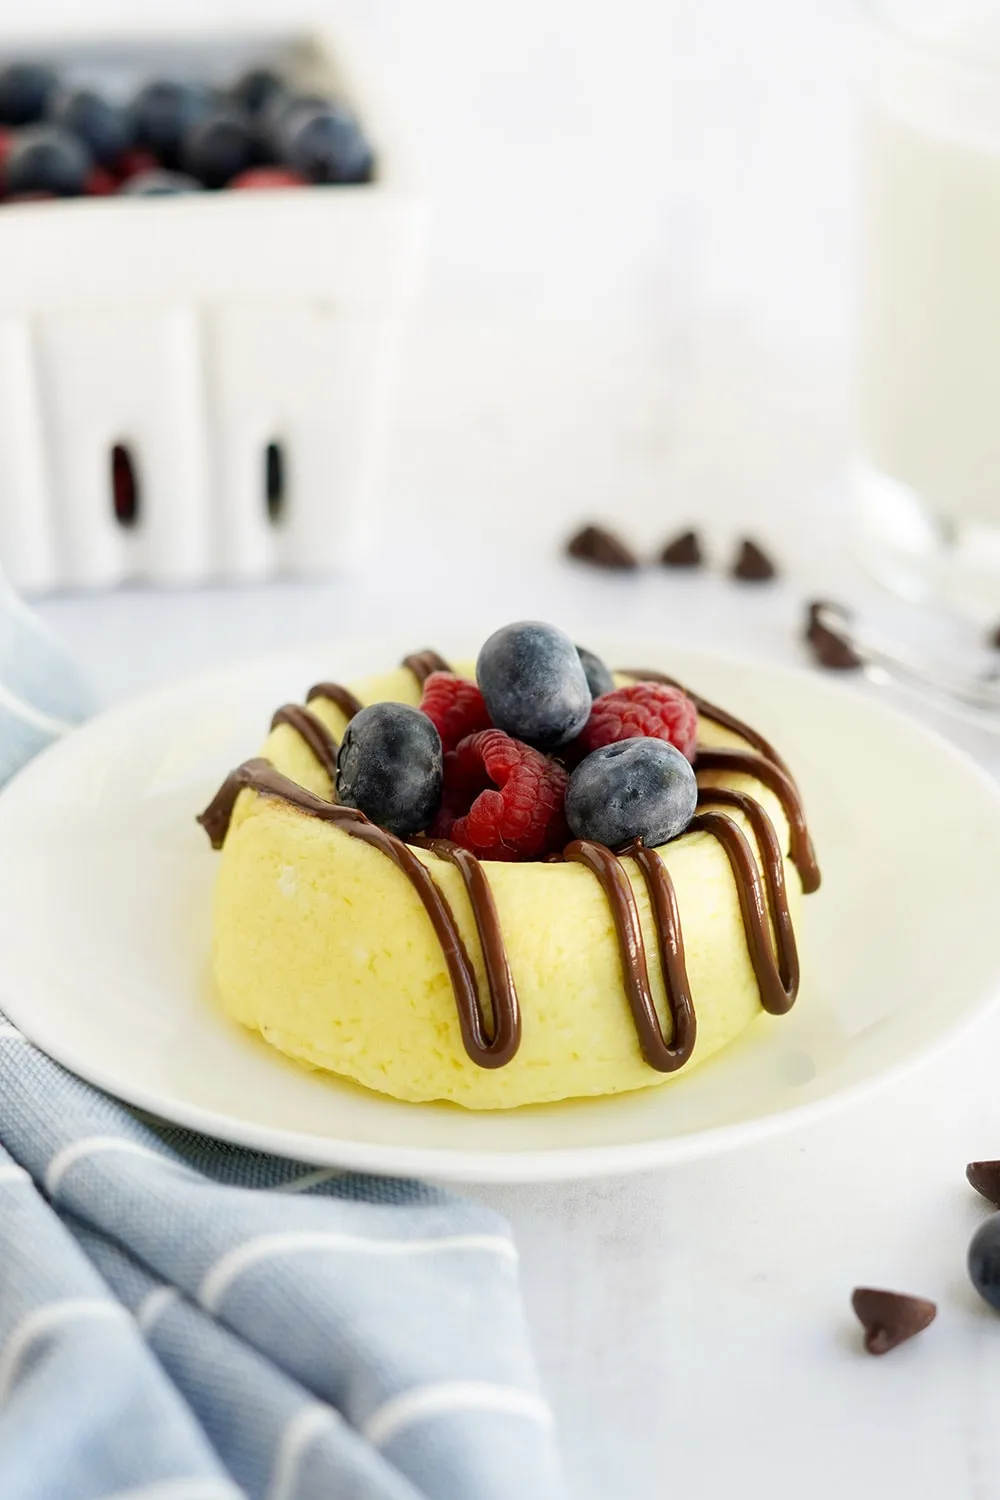 Small cheesecake on a white plate topped with berries and melted chocolate.